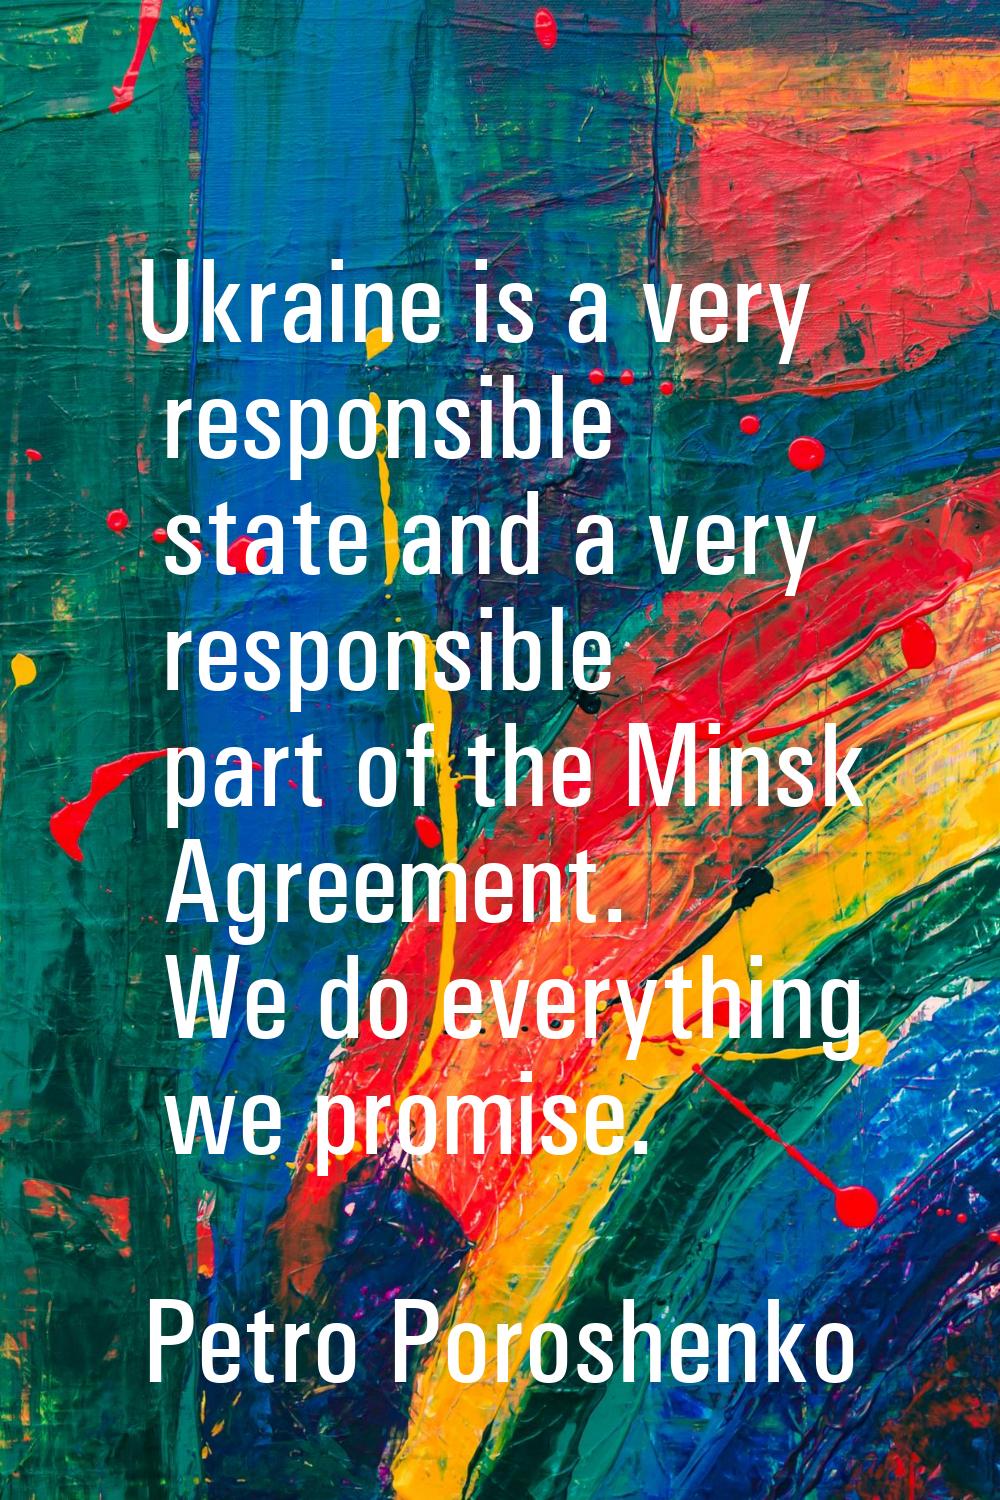 Ukraine is a very responsible state and a very responsible part of the Minsk Agreement. We do every